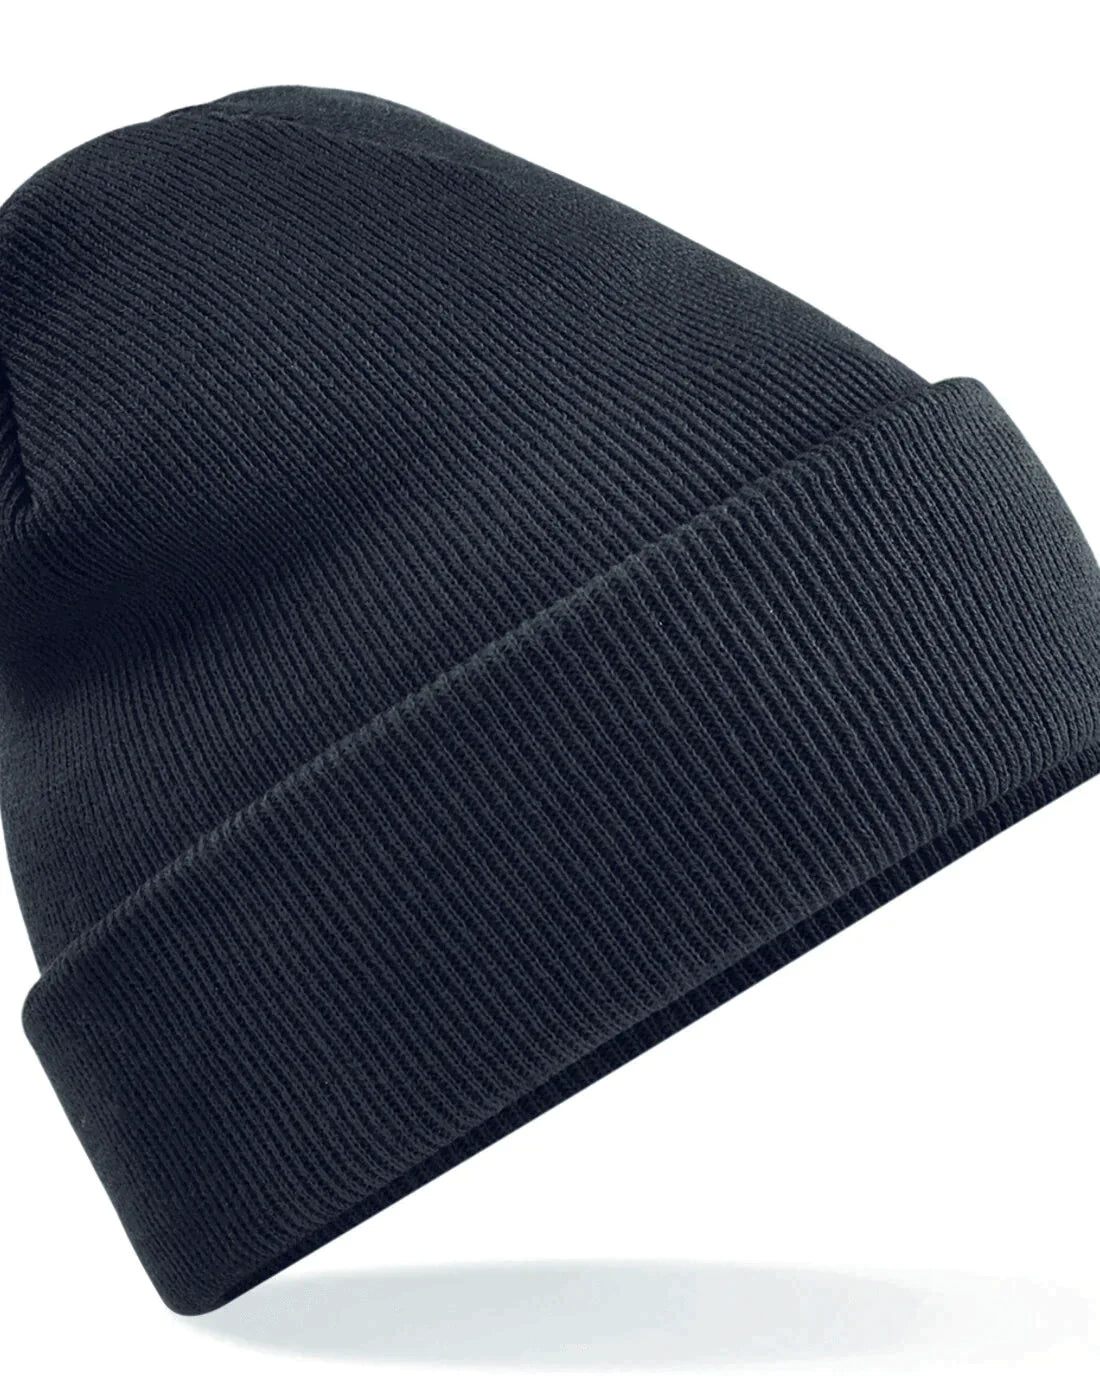 100x Embroidered Beanie Hats Bundle Deal